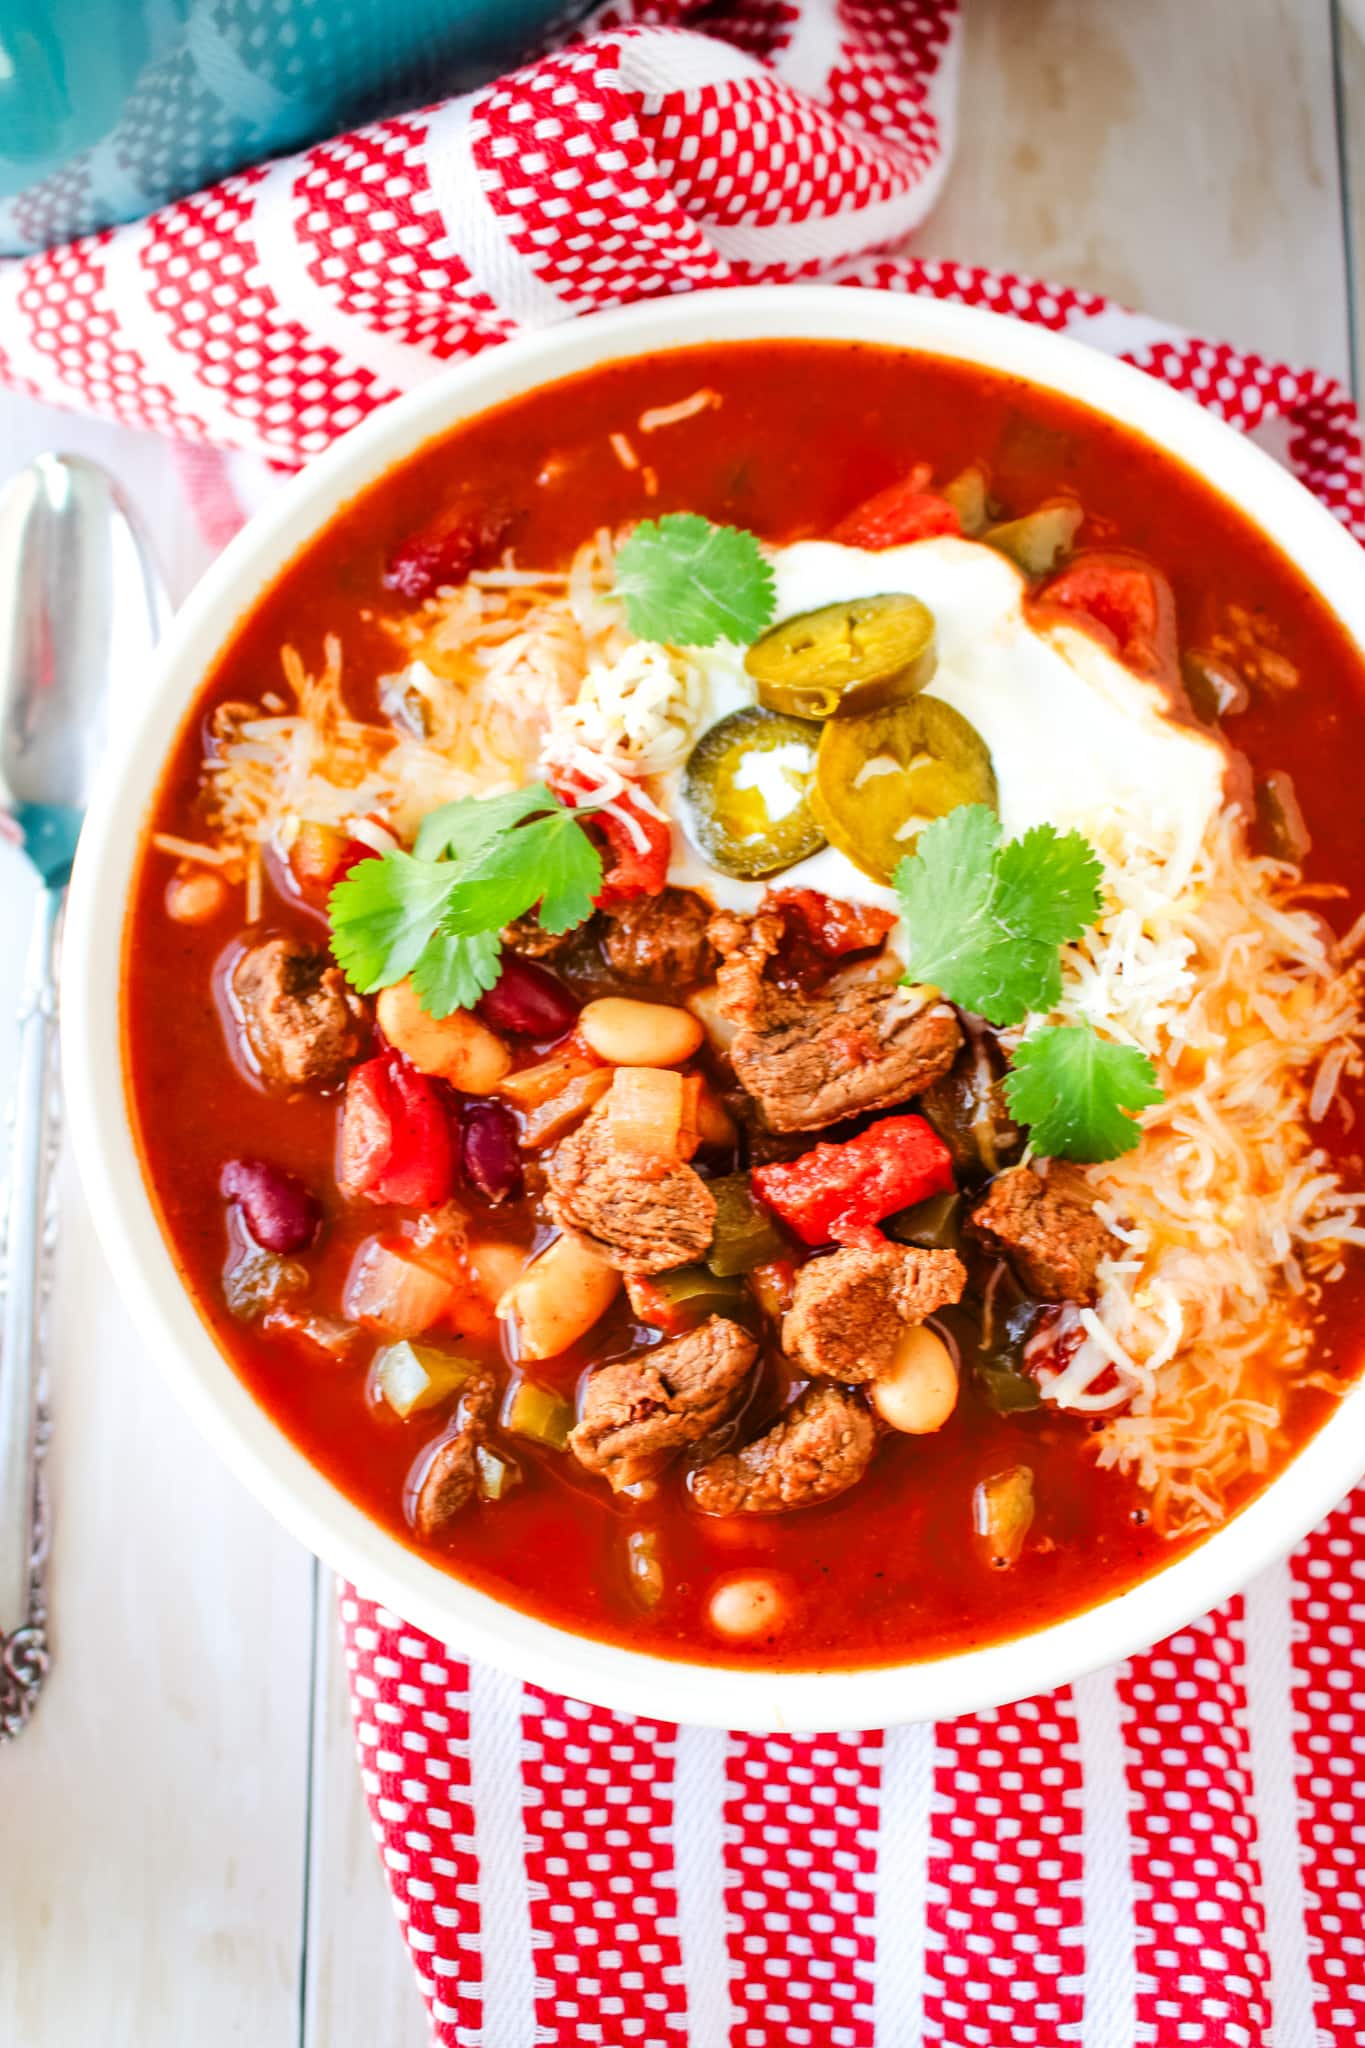 Chipotle steak chili recipe topped with shredded cheese, sour cream, cilantro and sliced jalepenos.